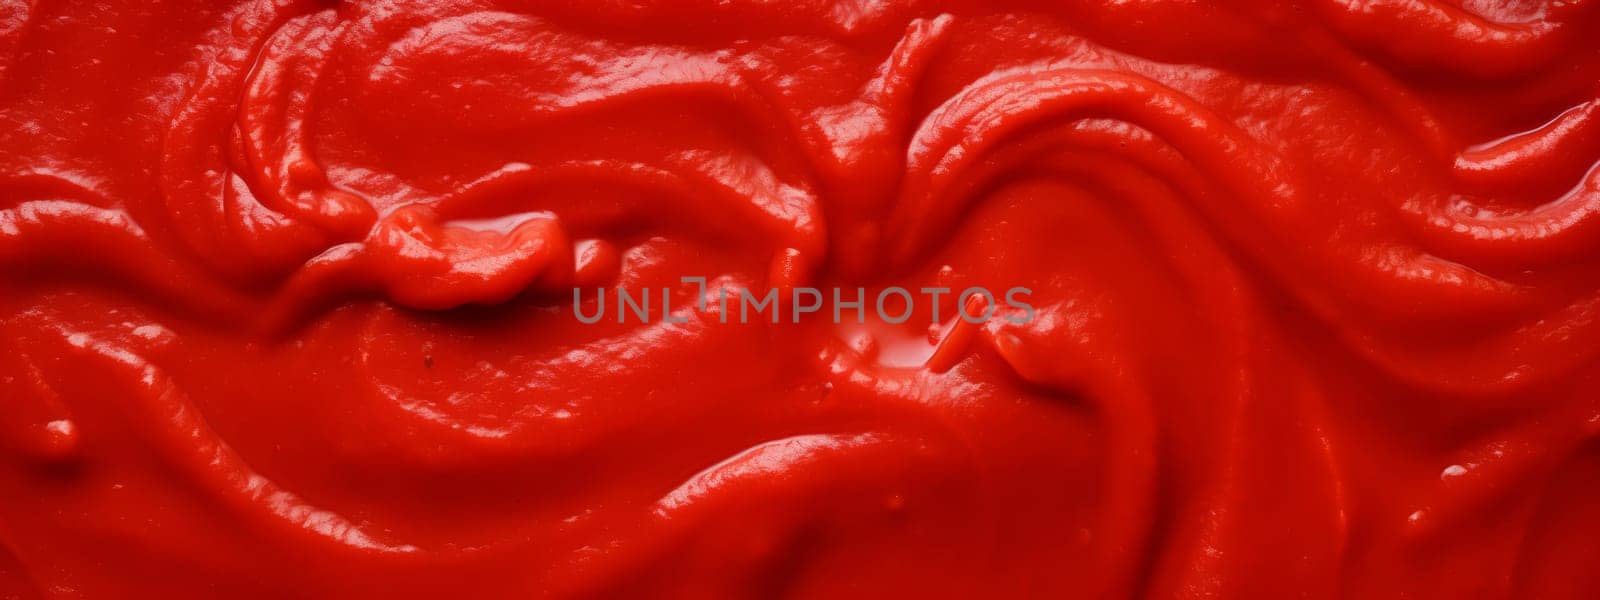 Tomato paste or ketchup seamless texture background. by Artsiom